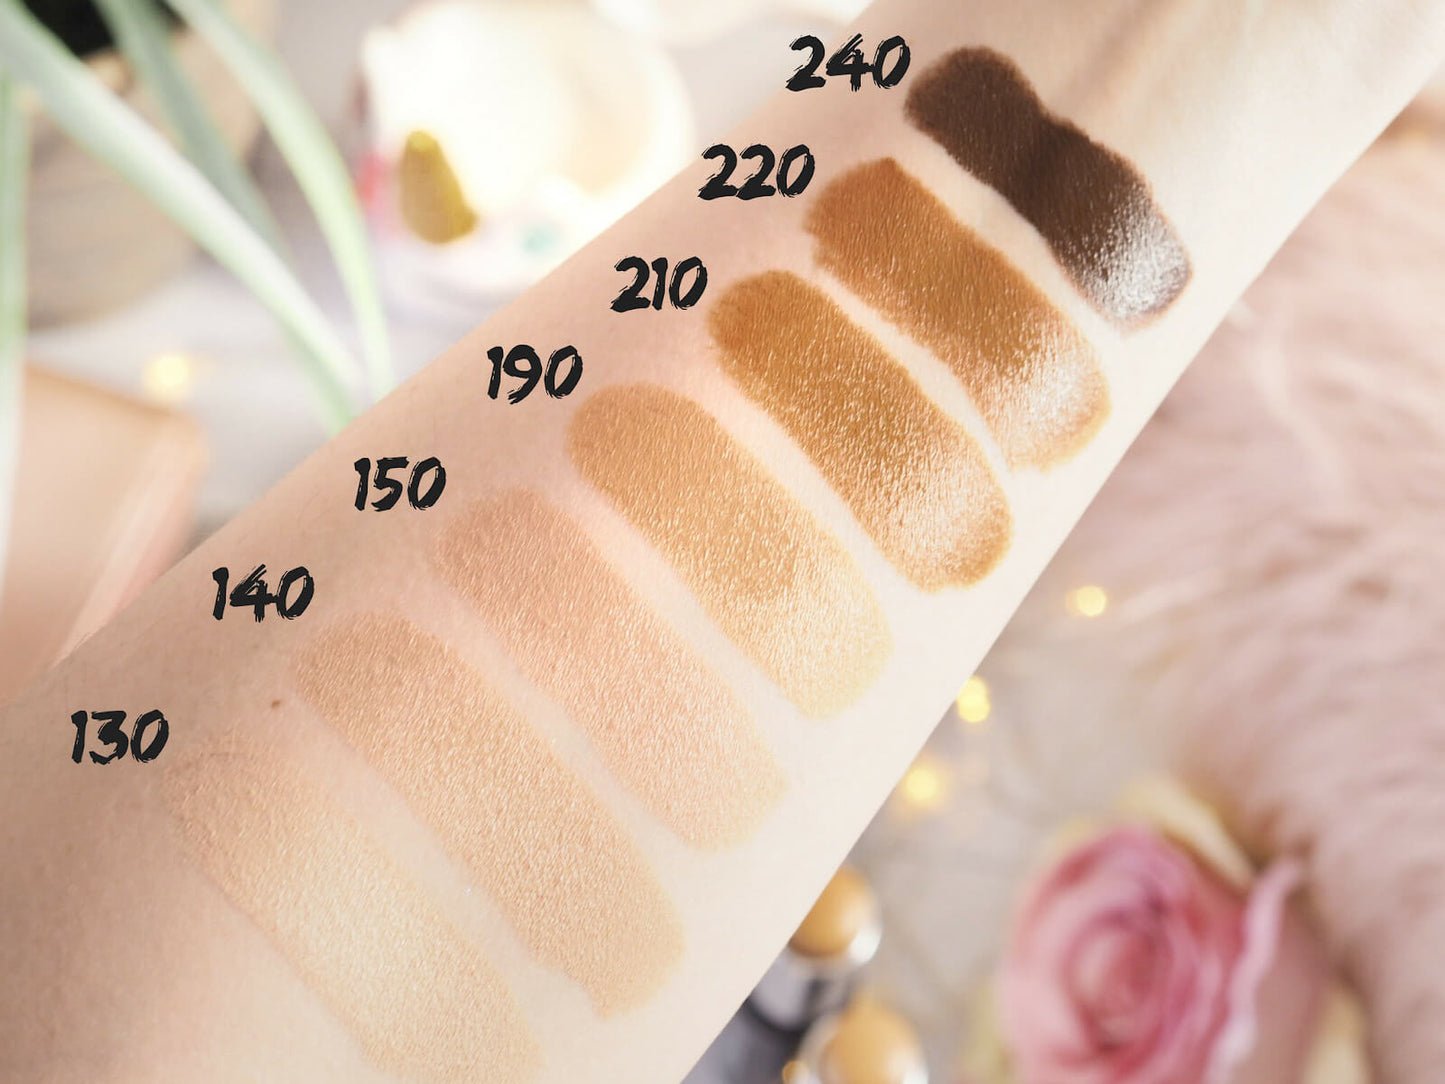 Loreal Infallible Foundation Stick 150 Beige Rose